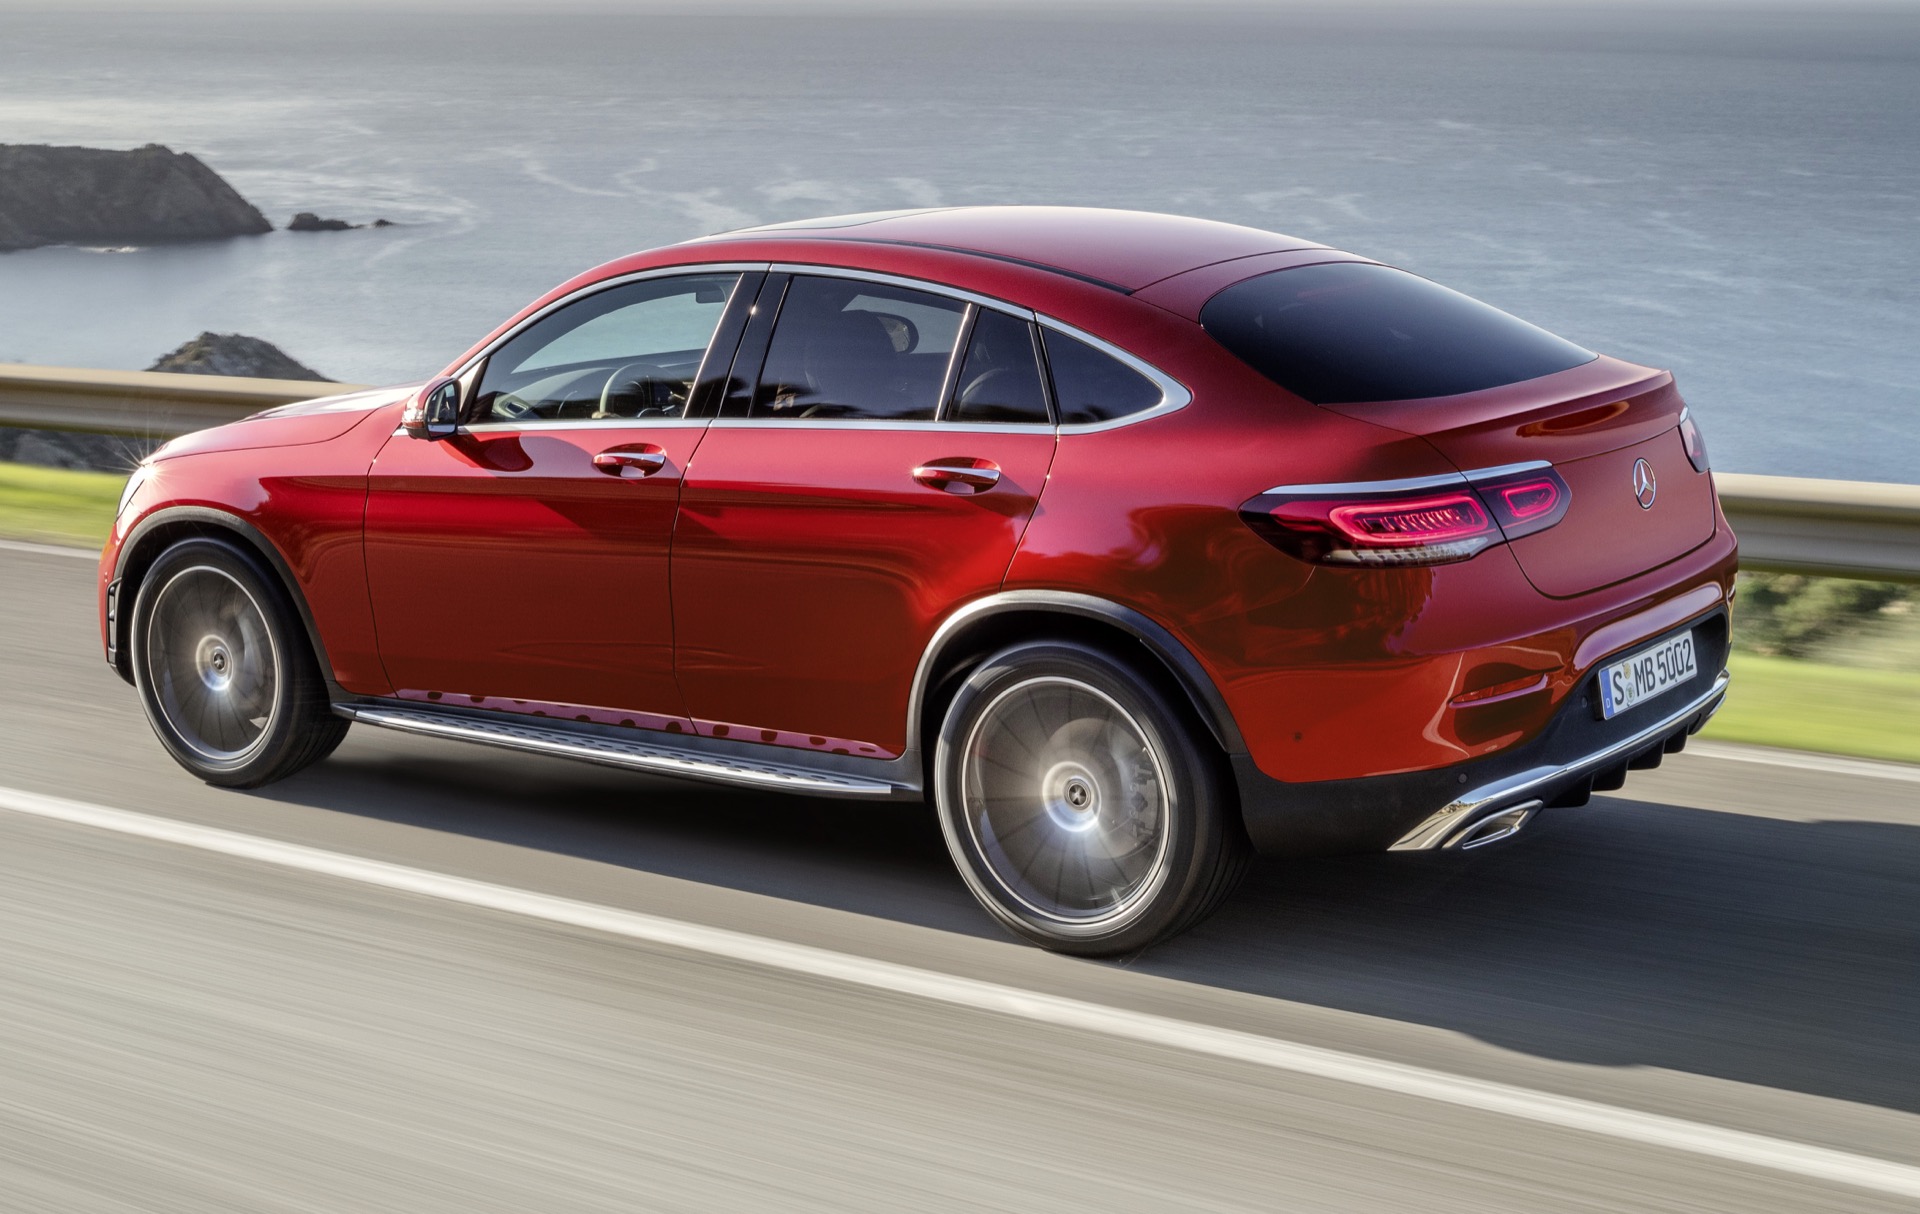 Mercedes Benz Glc Class Coupe Debuts With More Power Tech And Updated Looks